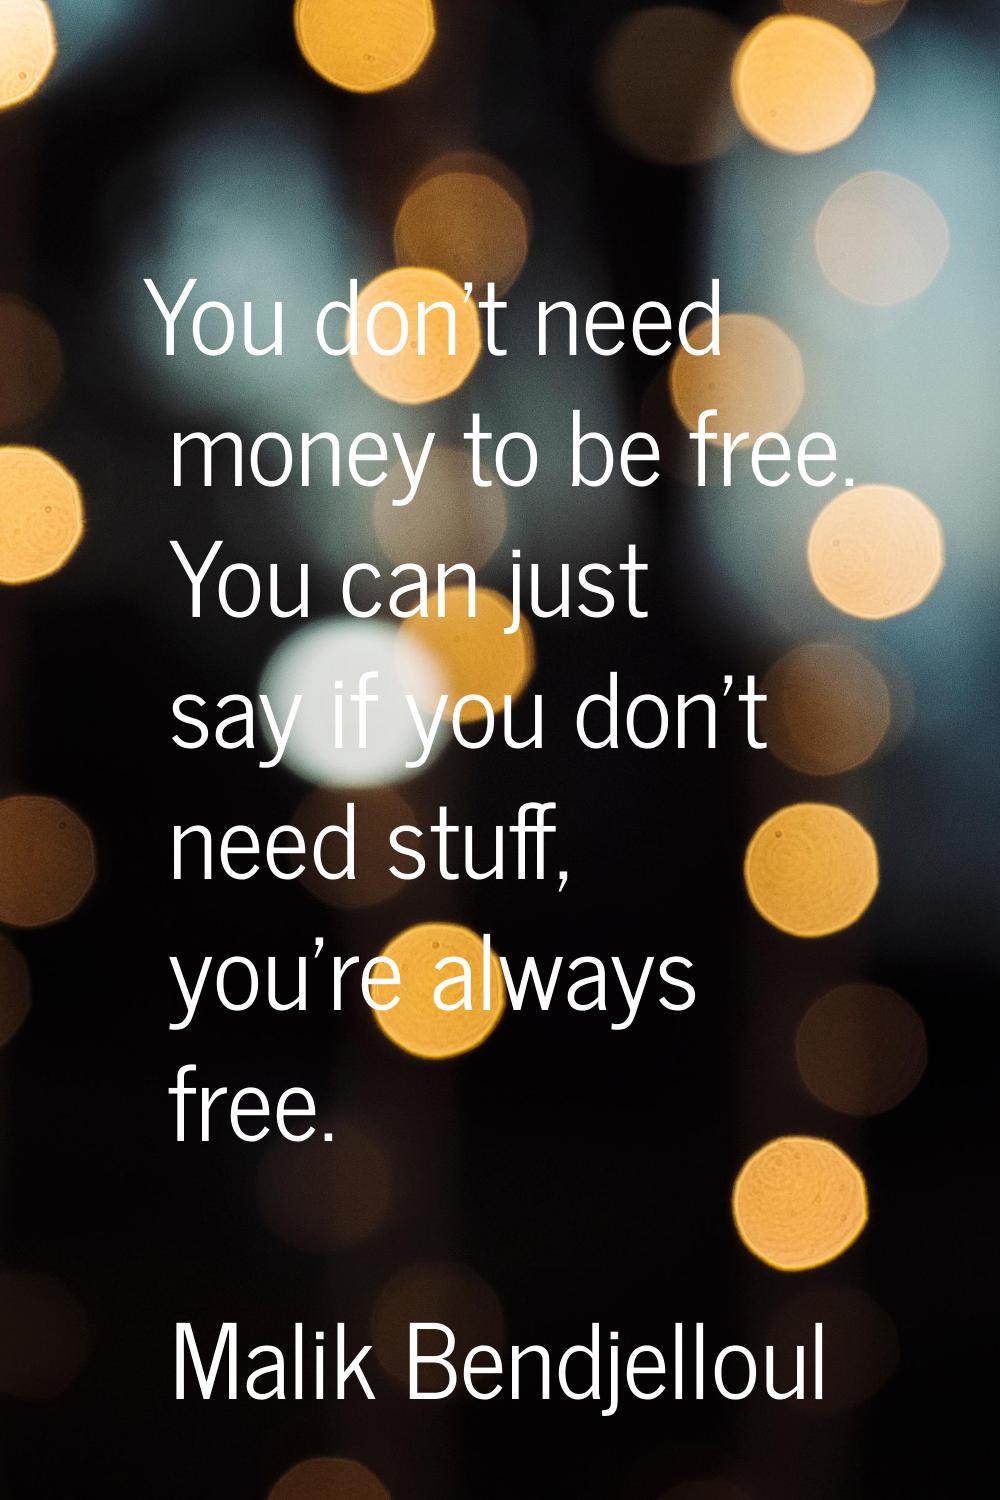 You don't need money to be free. You can just say if you don't need stuff, you're always free.